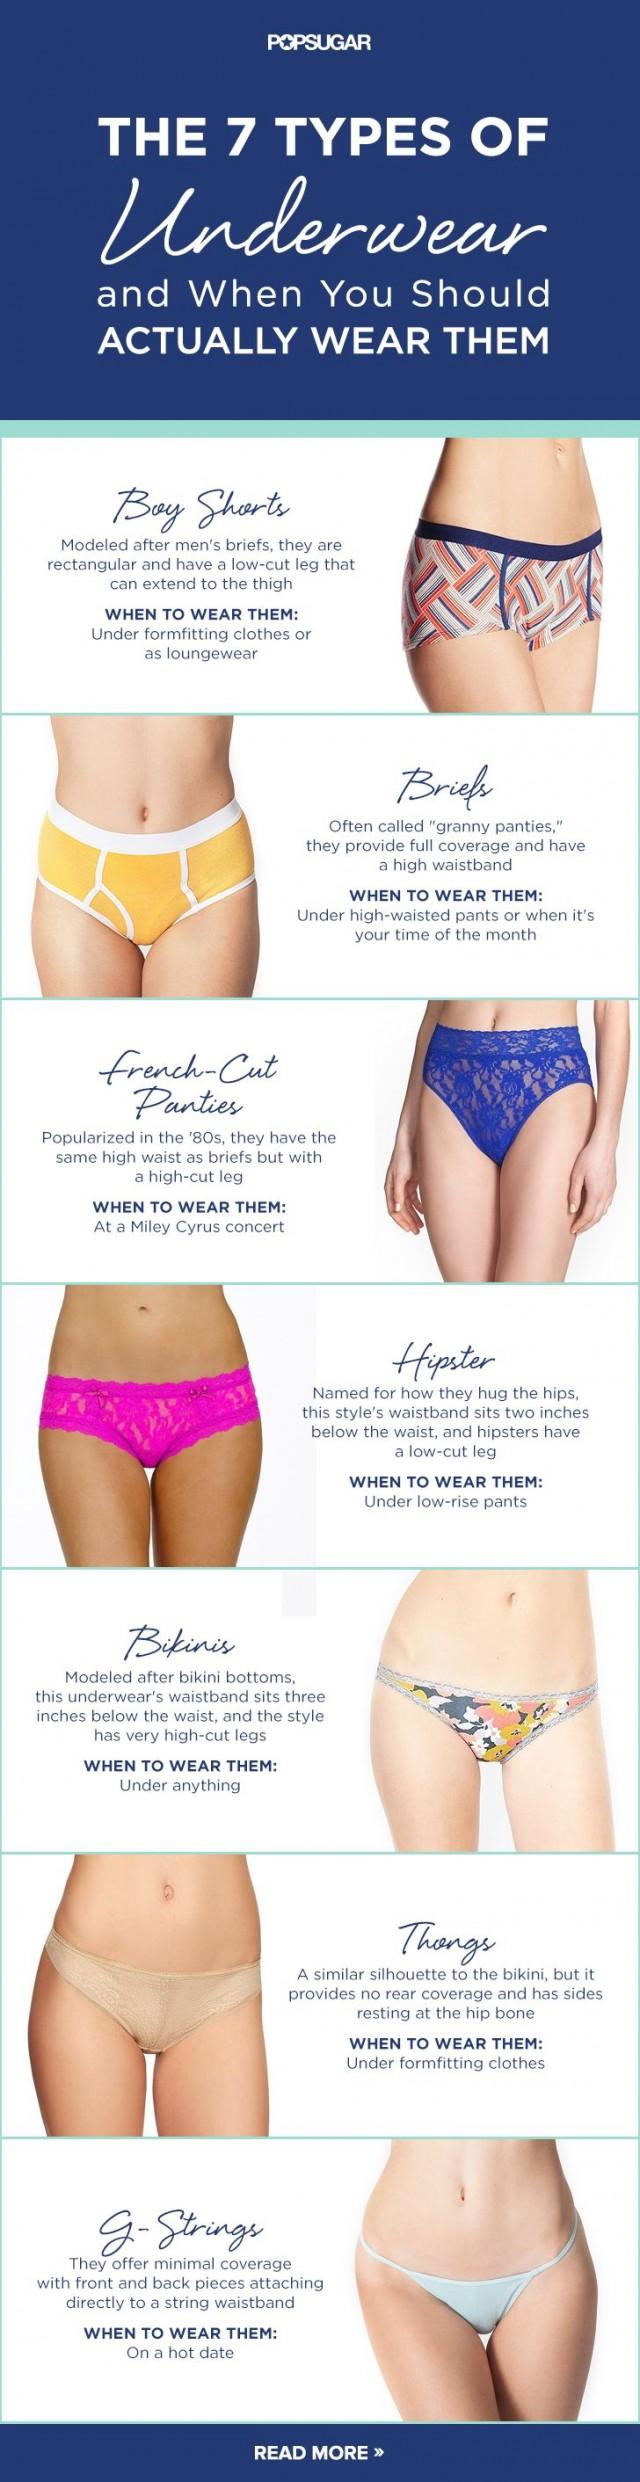 The 7 Types Of Underwear And When You Should Actually Wear Them 2415770 Weddbook 1809